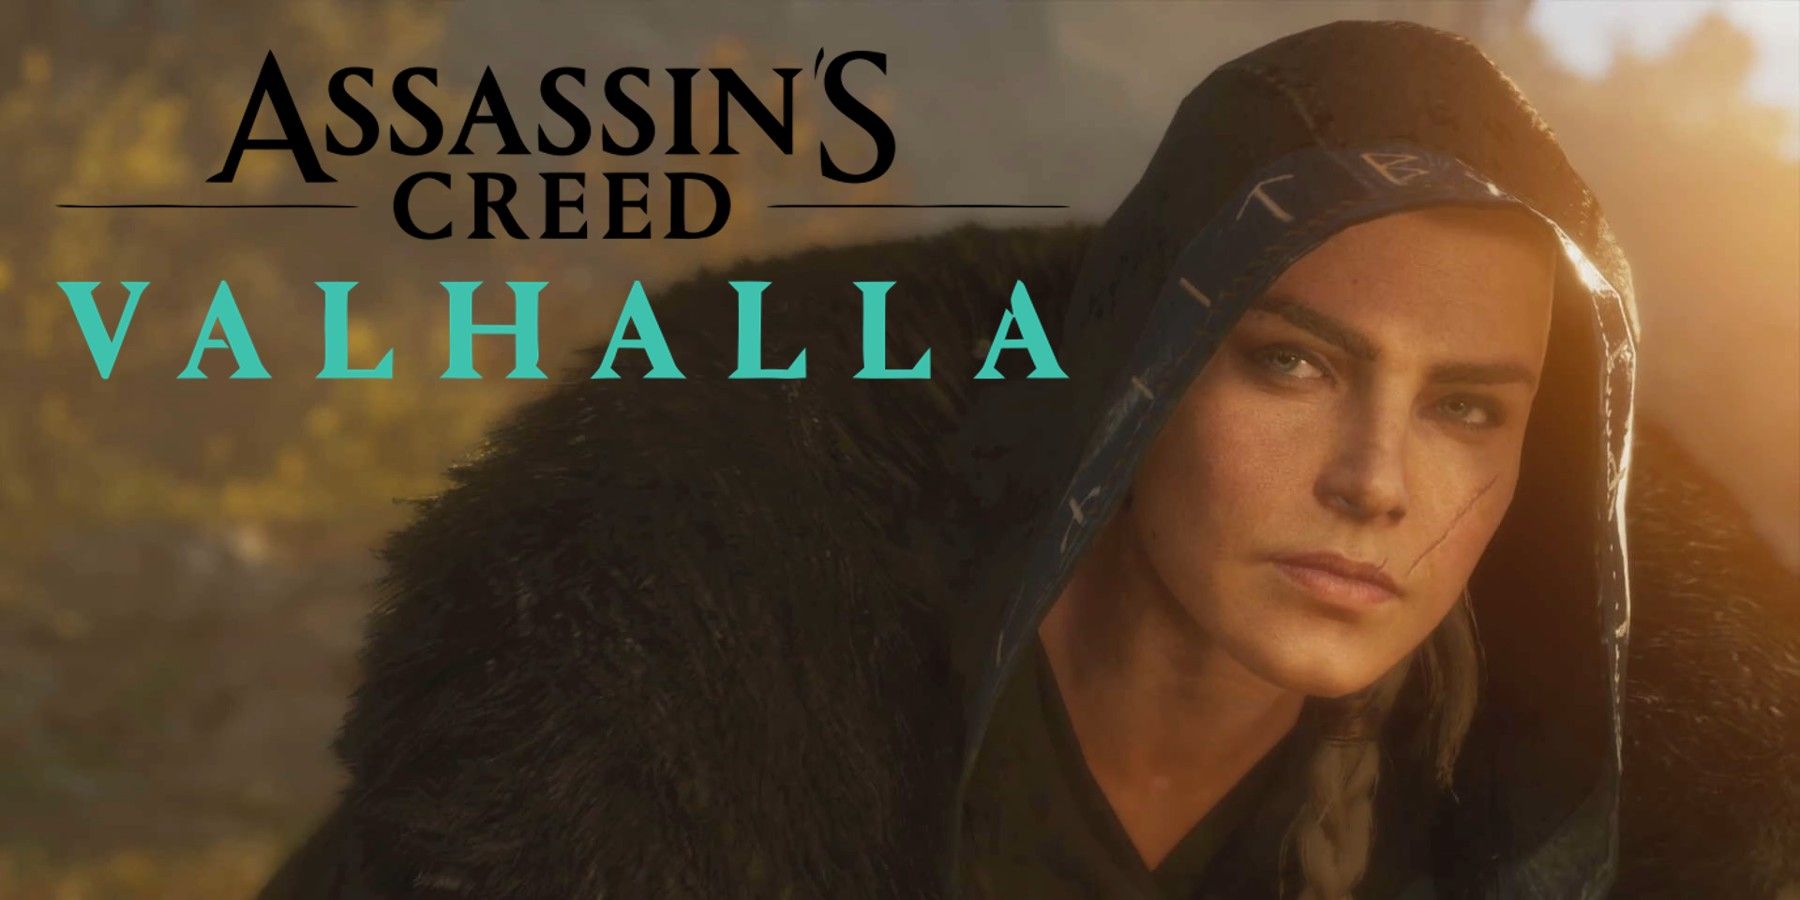 Assassin's Creed Valhalla The Last Chapter Will Be the Game's